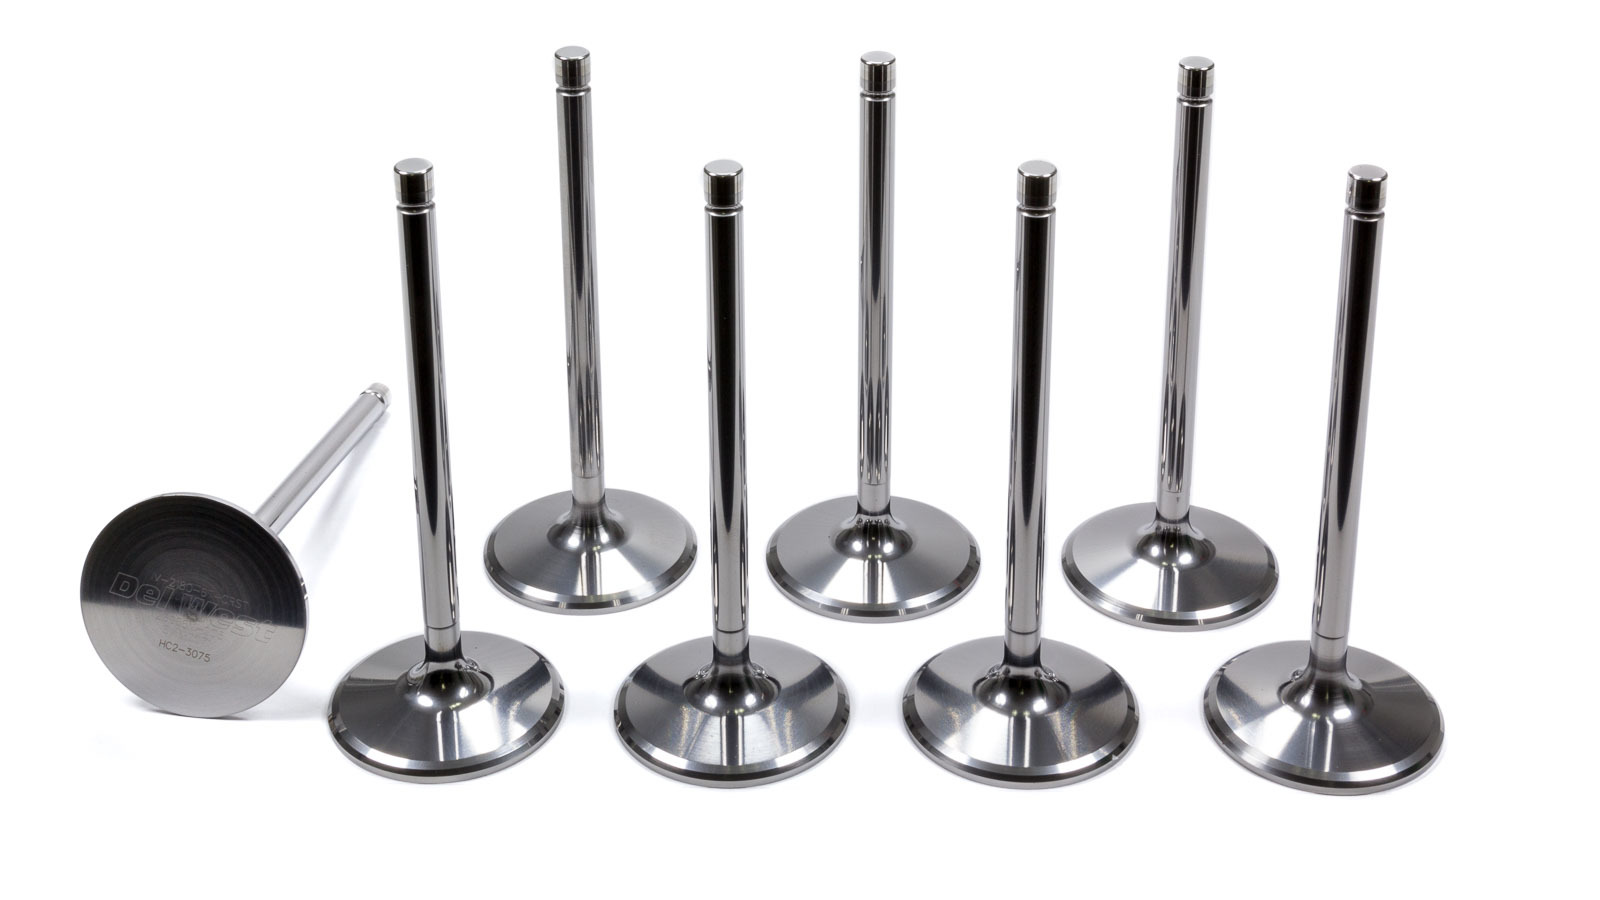 Del West IV2180-6T-CRST-8 Intake Valve, 2.180 in Head, 11/32 in Valve Stem, 5.540 in Long, Titanium, Small Block Chevy, Set of 8